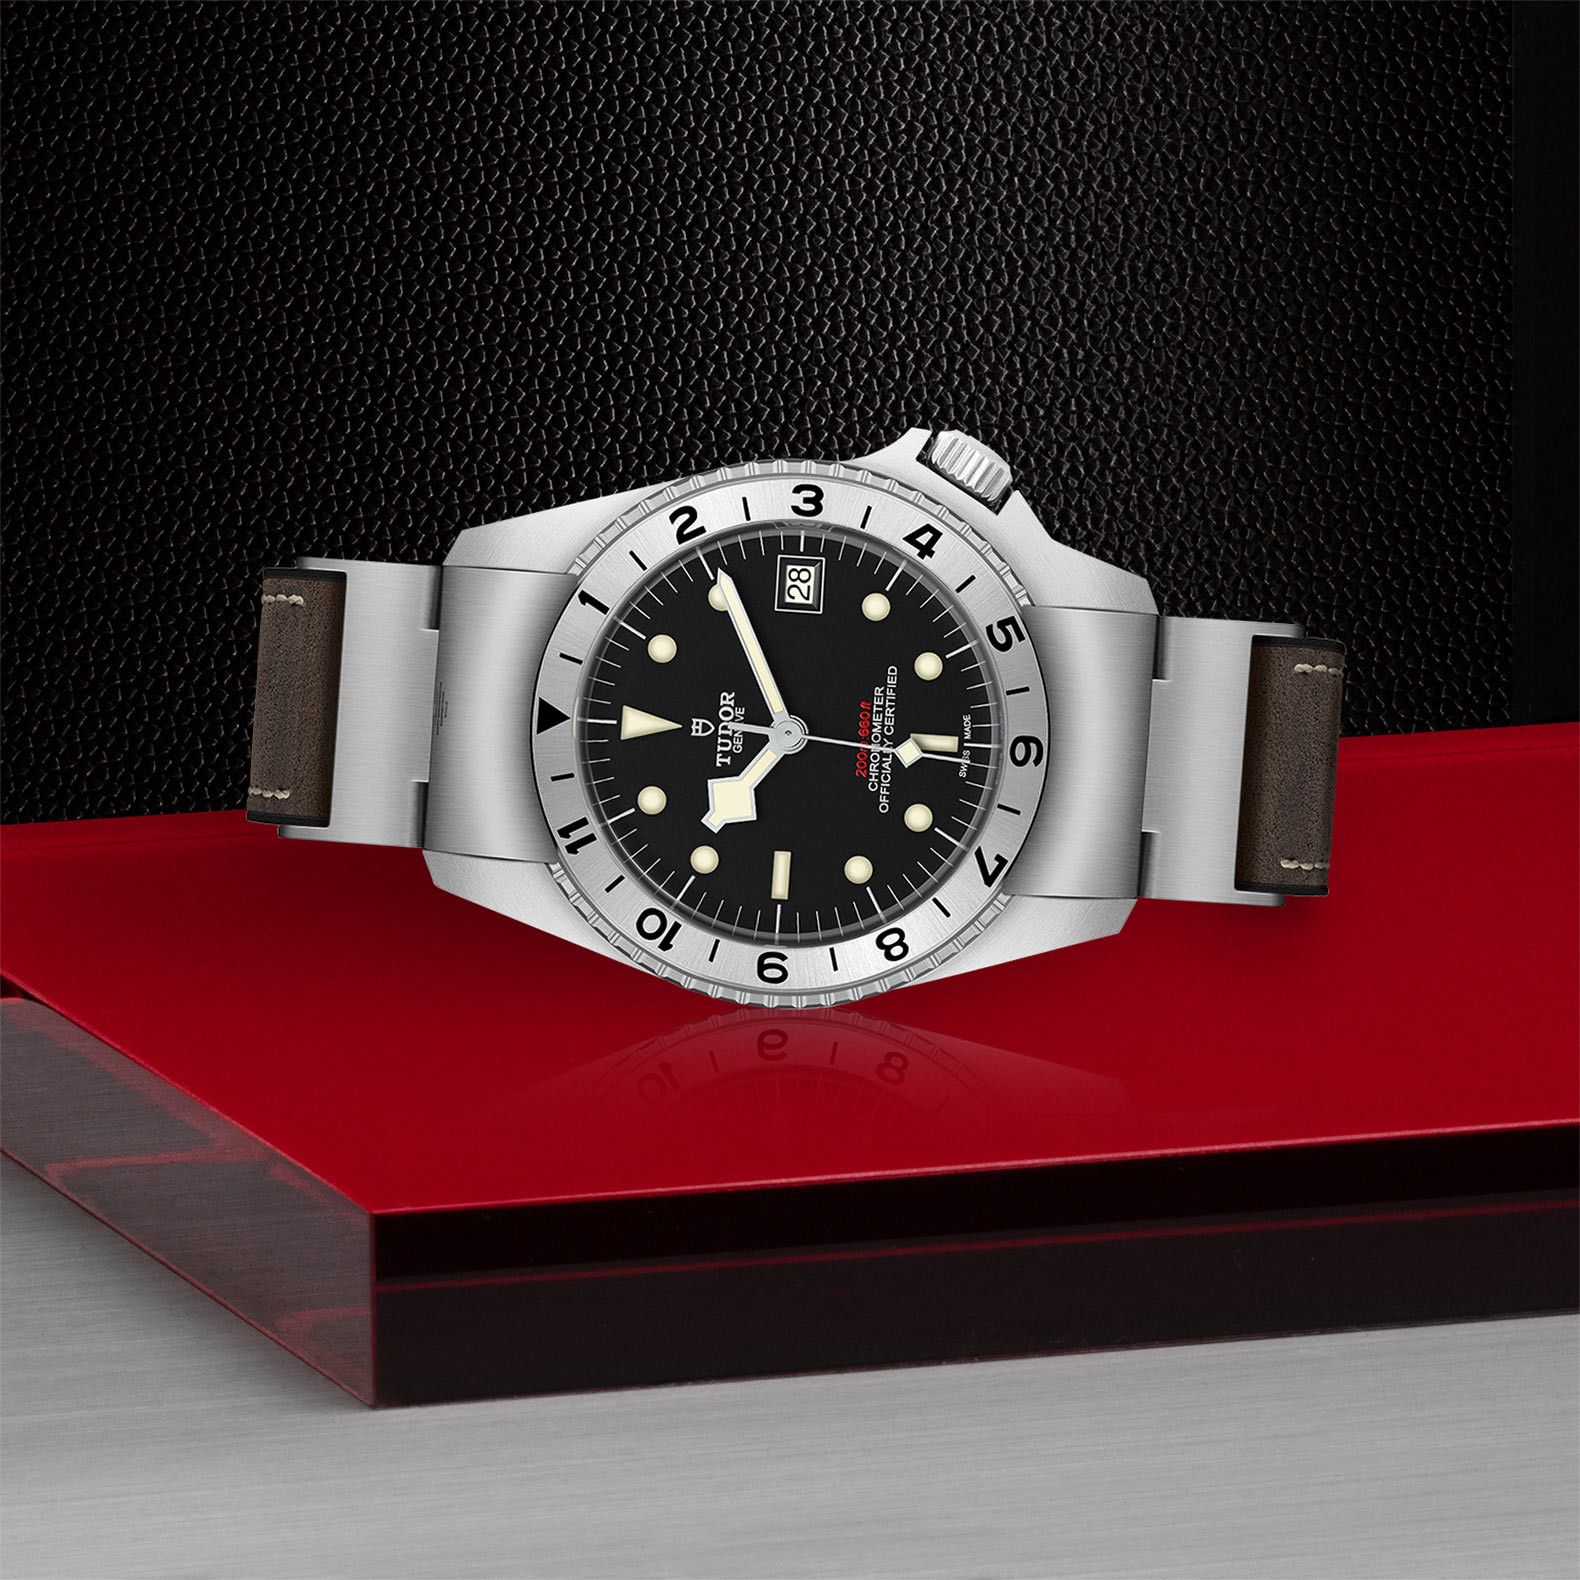 TUDOR Black Bay P01 Watch in Store Laying Down